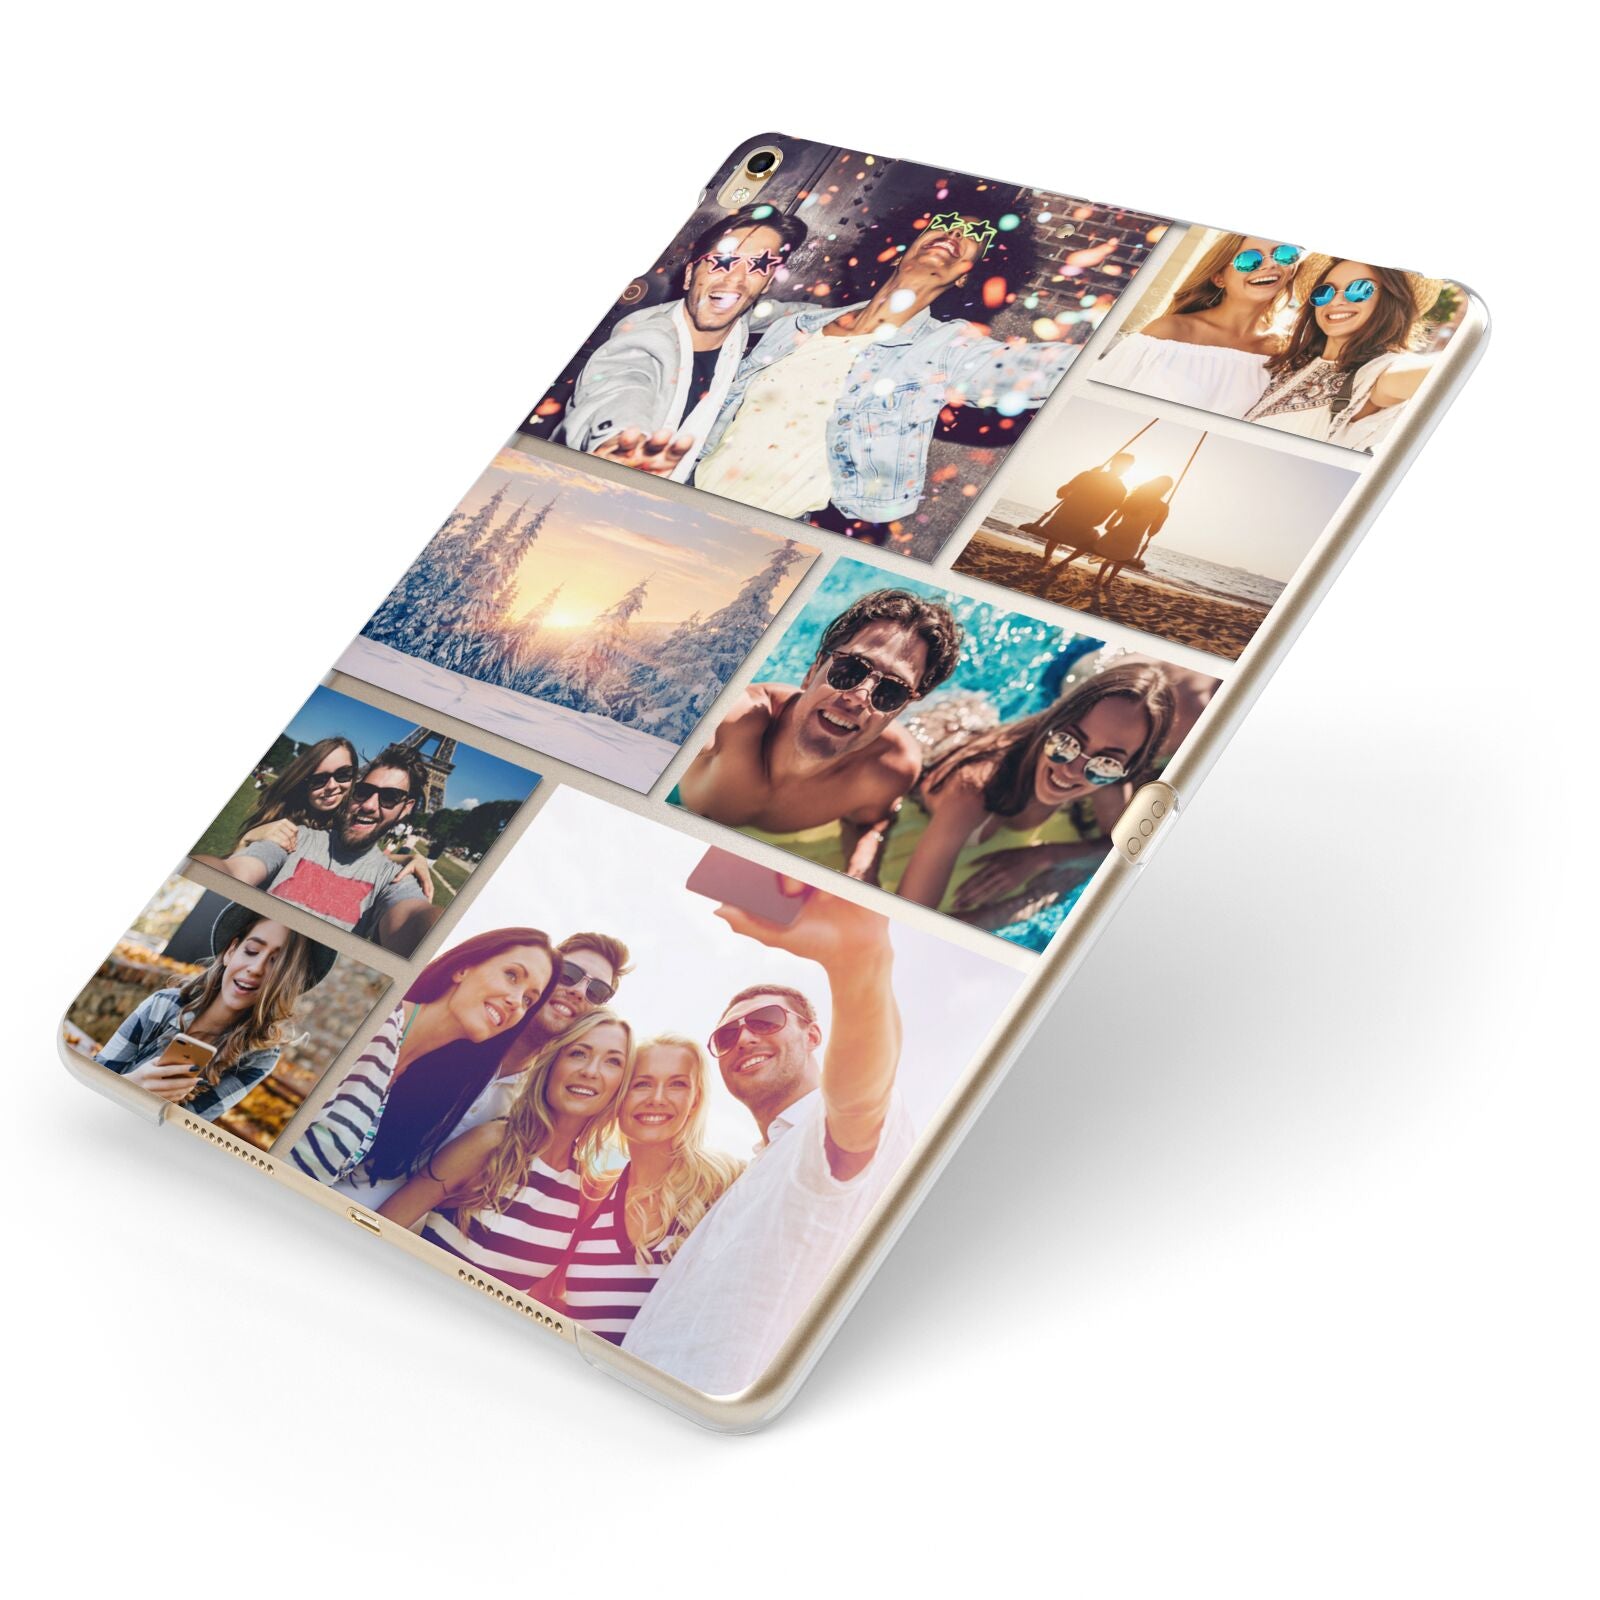 Photo Collage Apple iPad Case on Gold iPad Side View